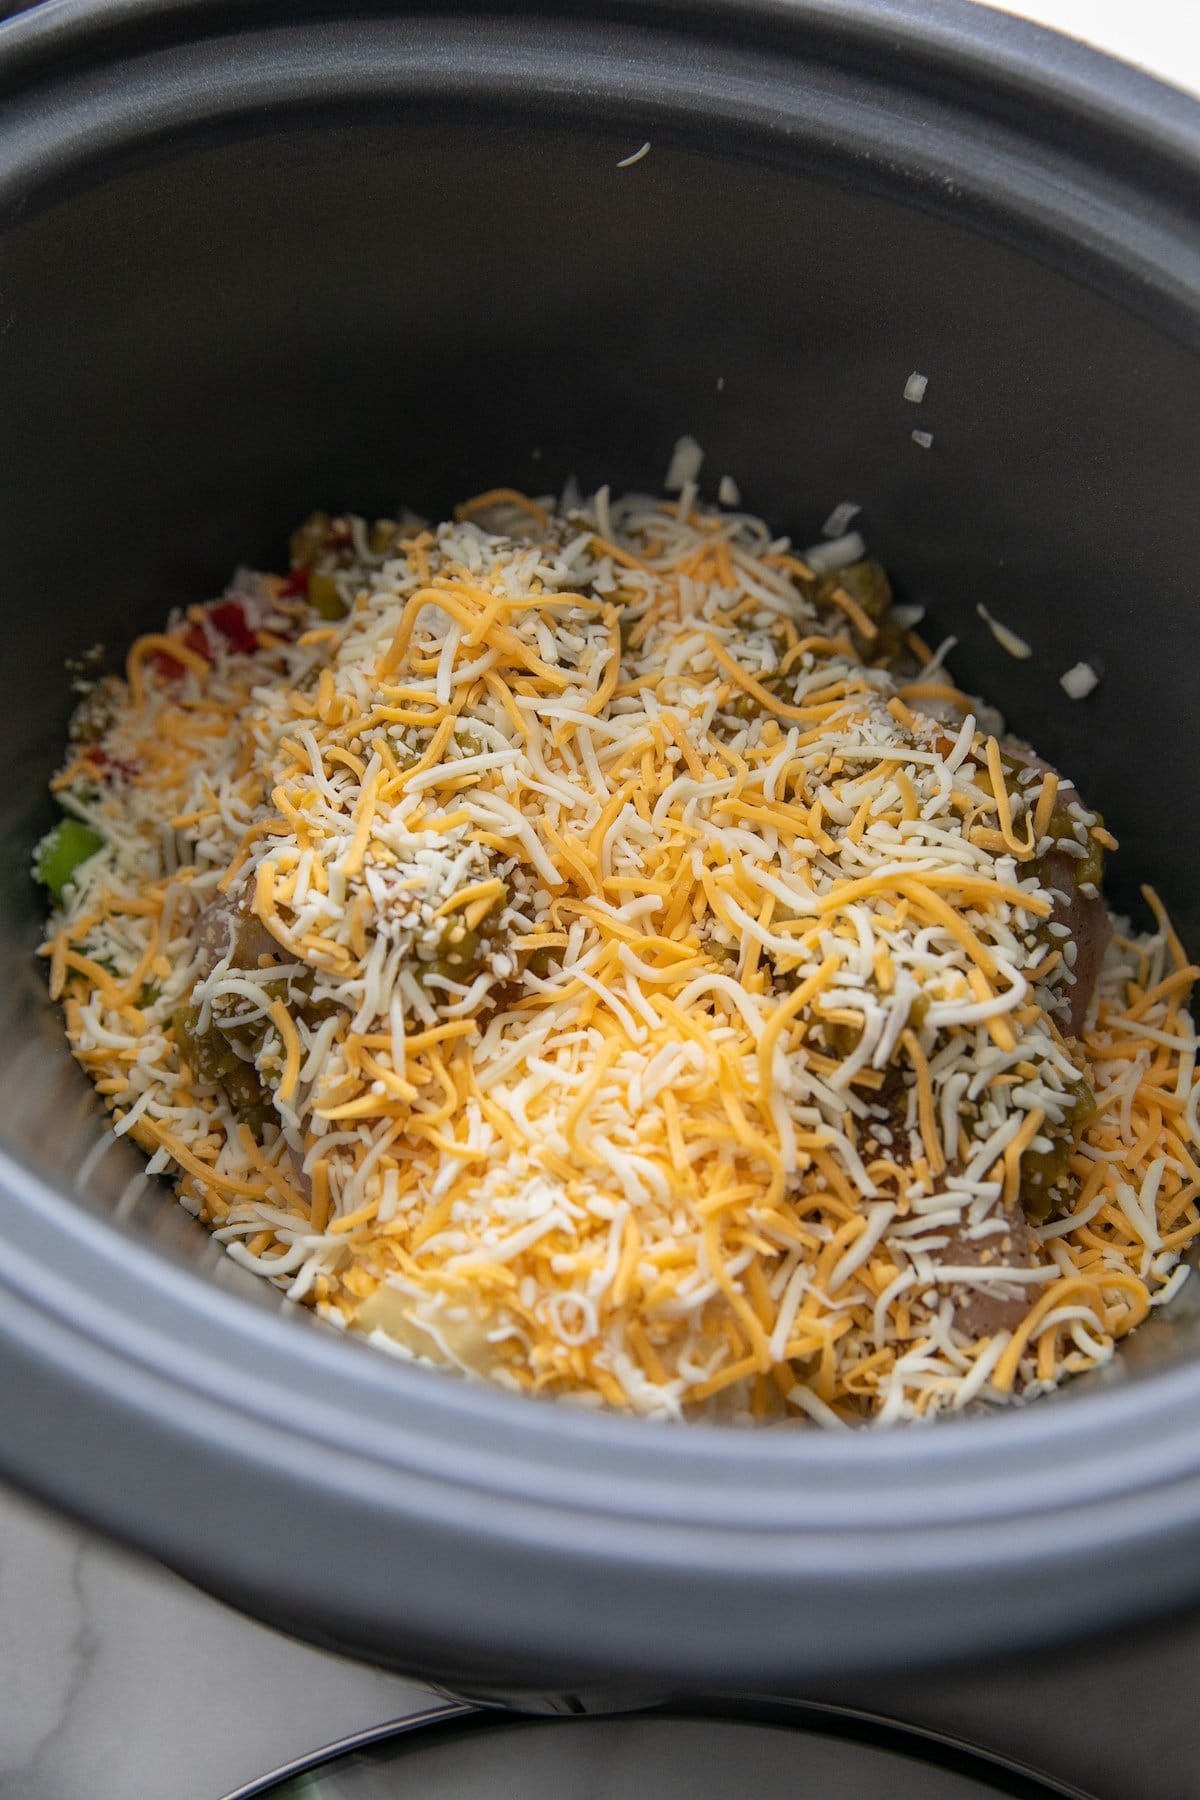 shredded cheese topping all other ingredients in a slow cooker